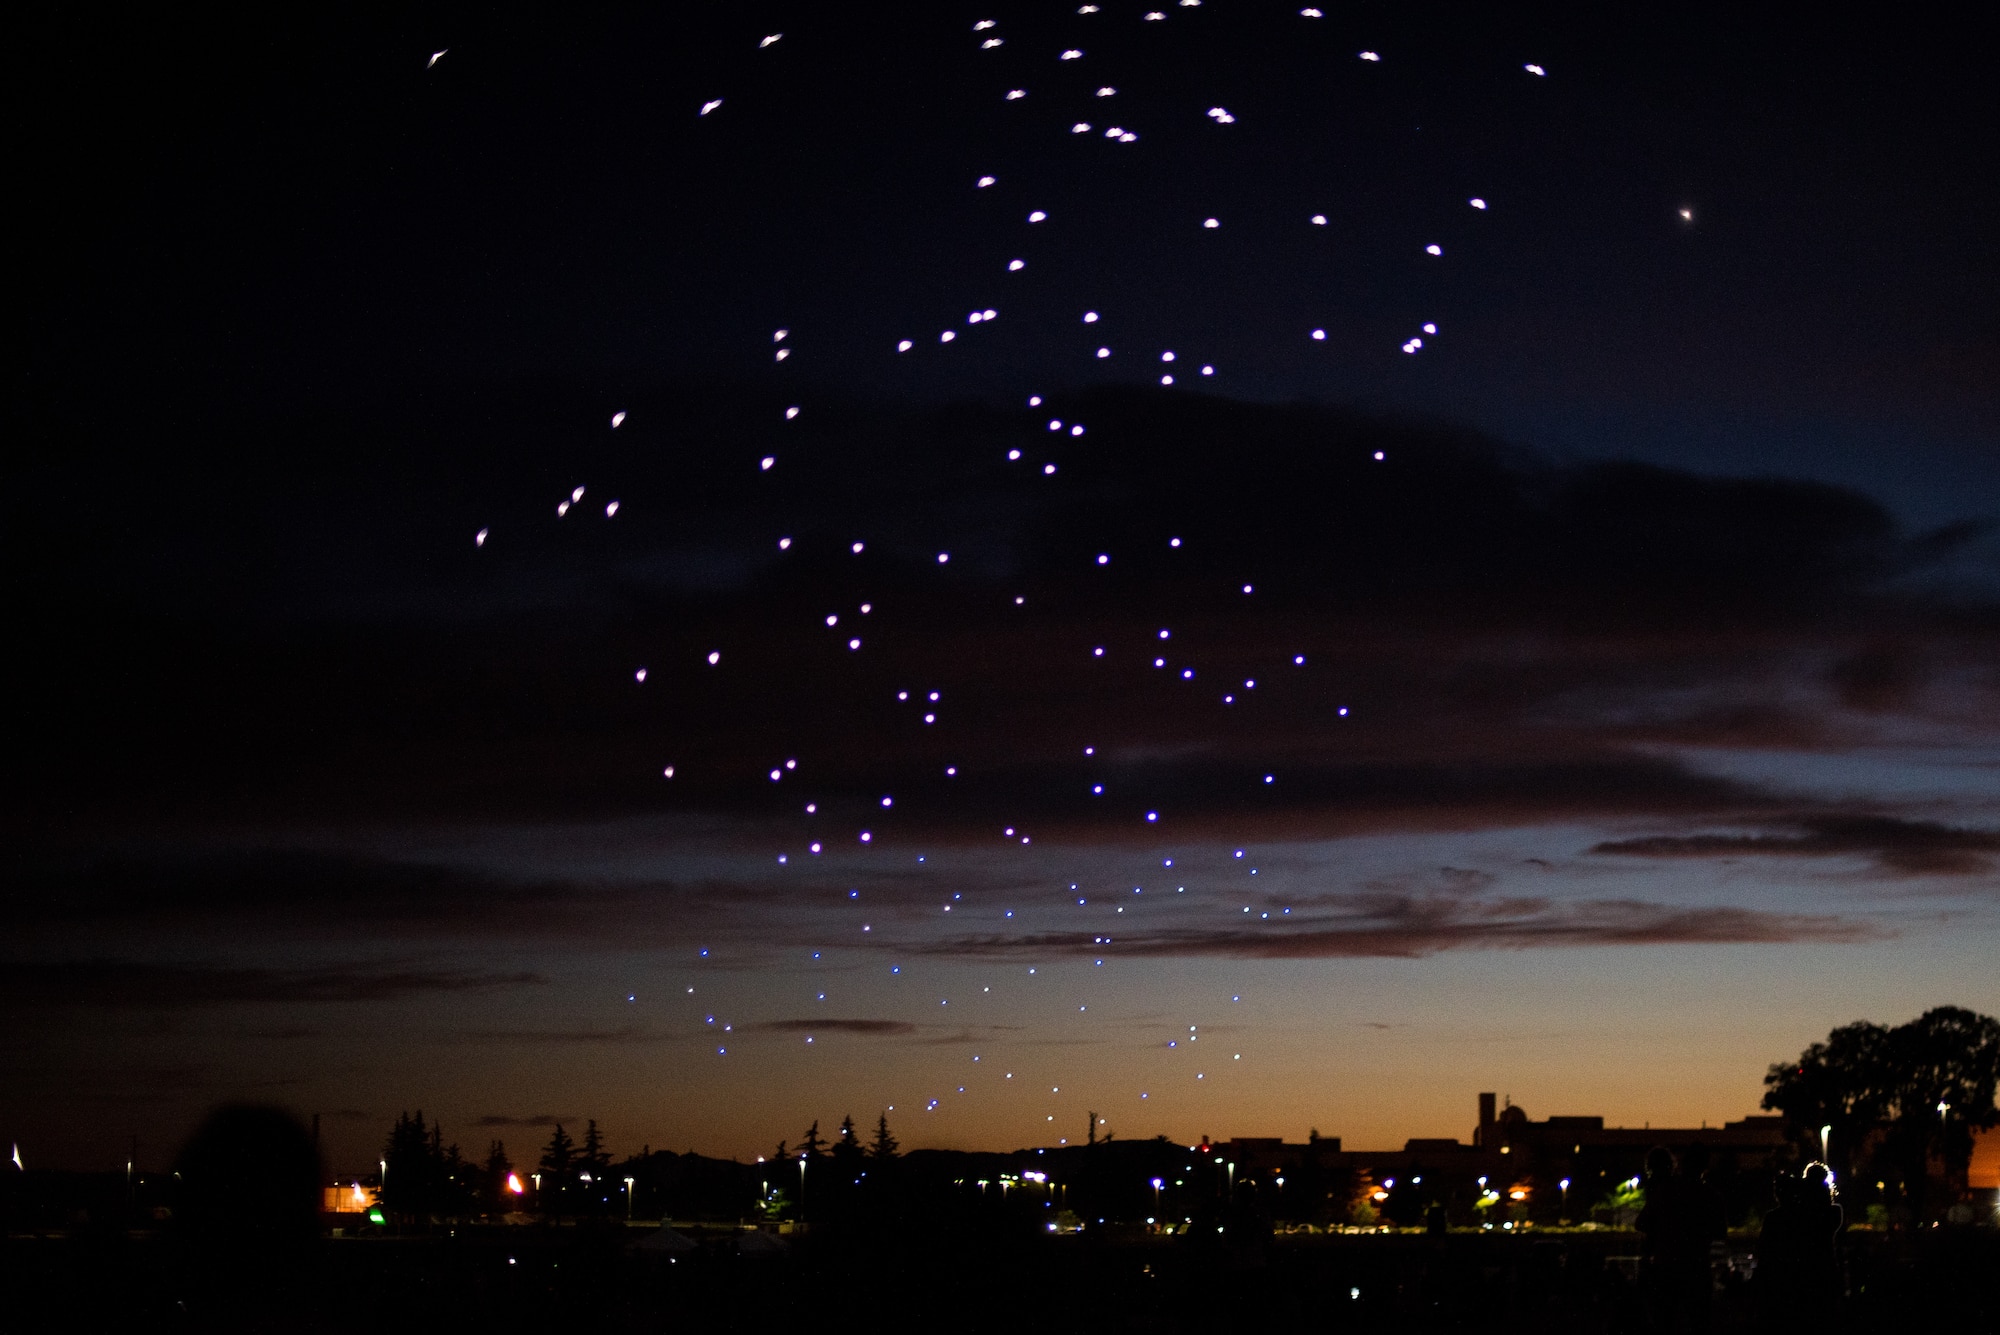 Intel Shooting Star Drones fly into the sky over Travis Air Force Base, Calif., July 5 during the base’s Independence Day celebration. The event featured numerous activities including music, bounce houses and an eight minute light show with 500 drones. (U.S. Air Force photo by Master Sgt. Joey Swafford)